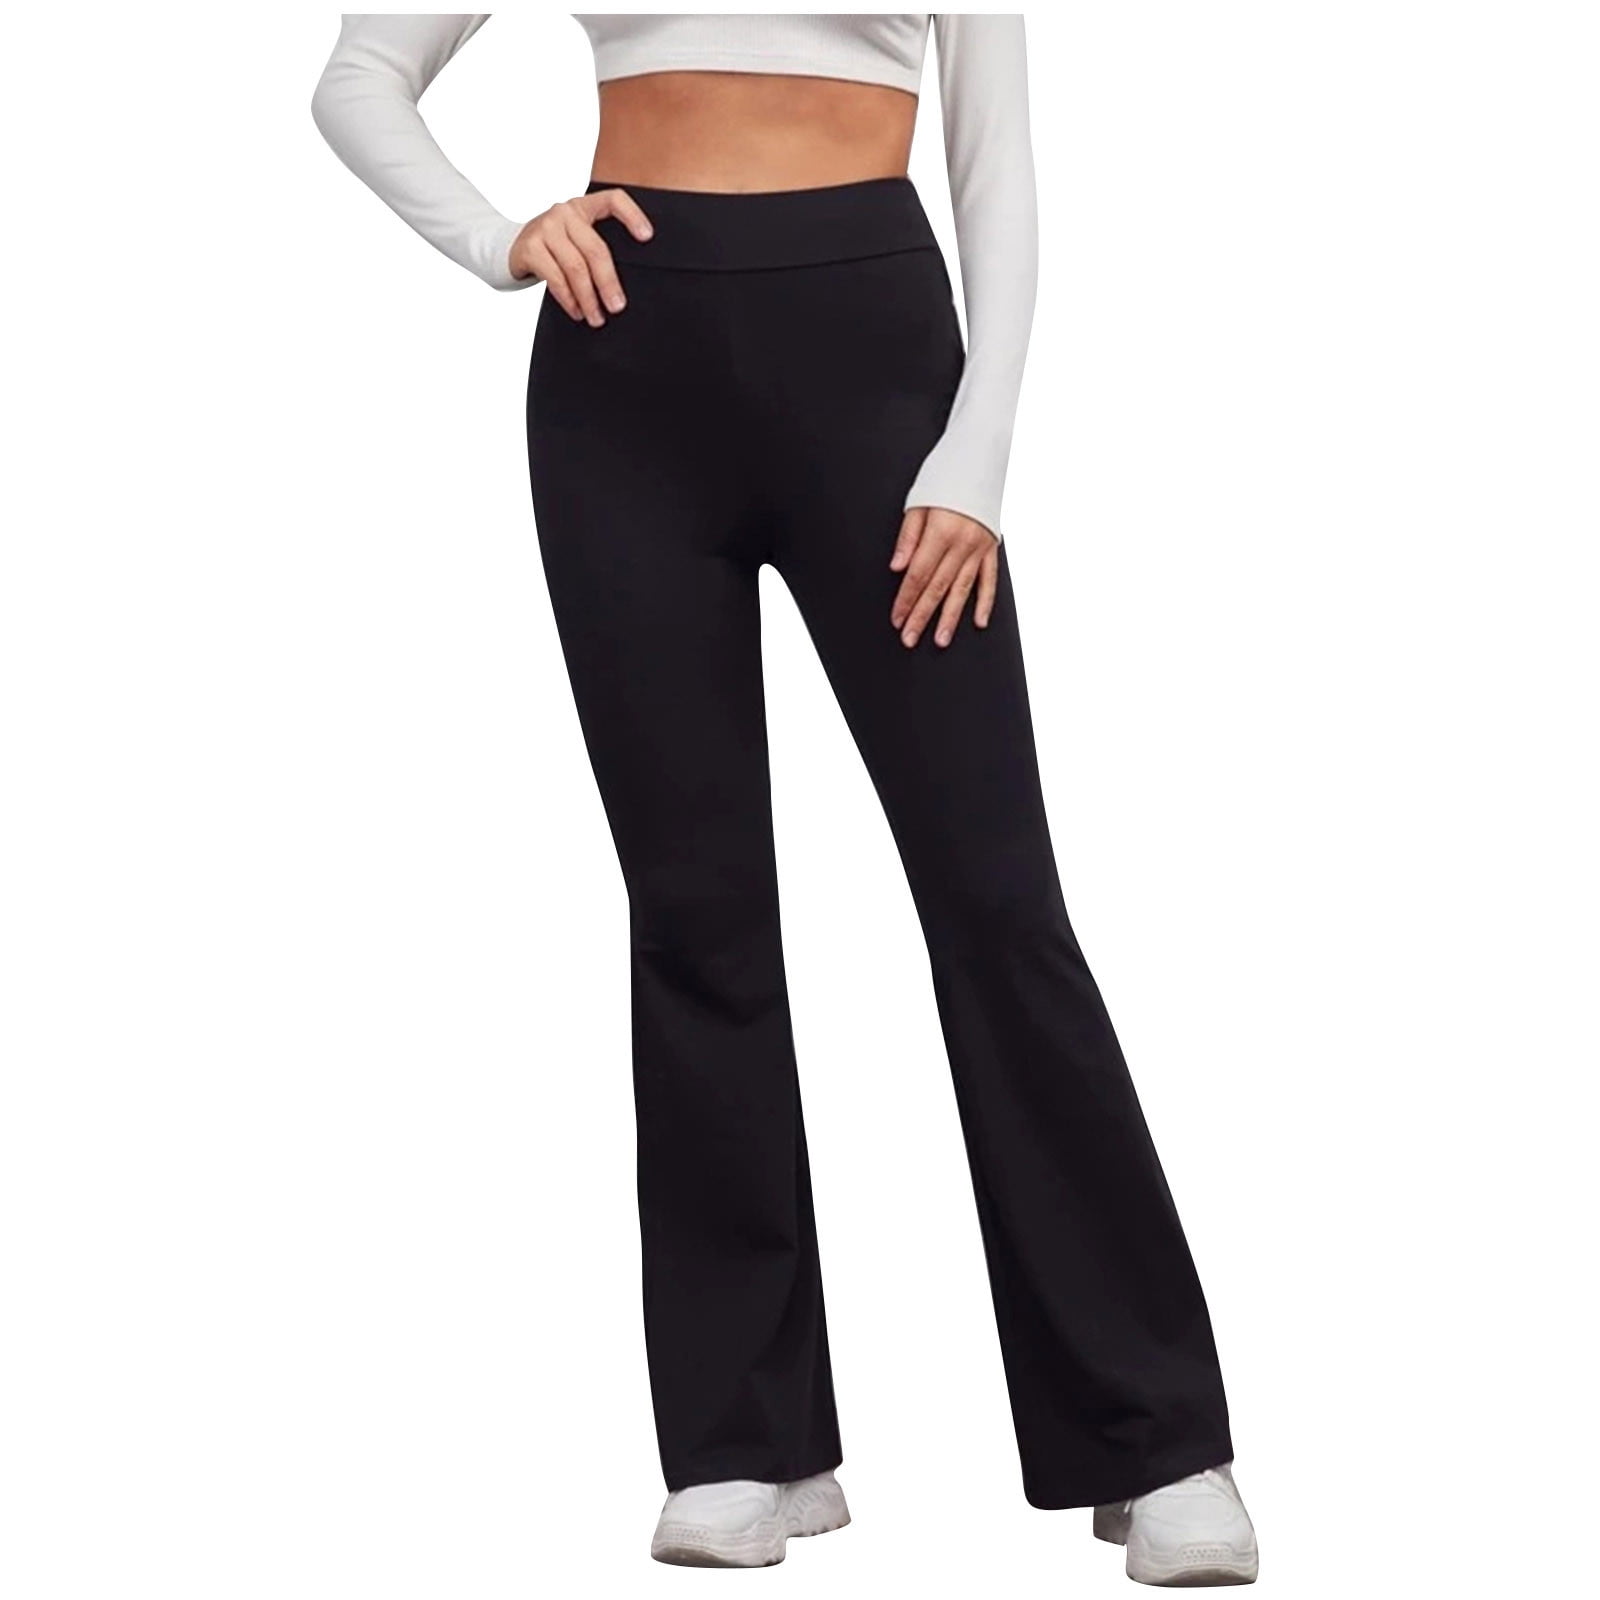 Black gym flare pants for women, ankle length sports pants.